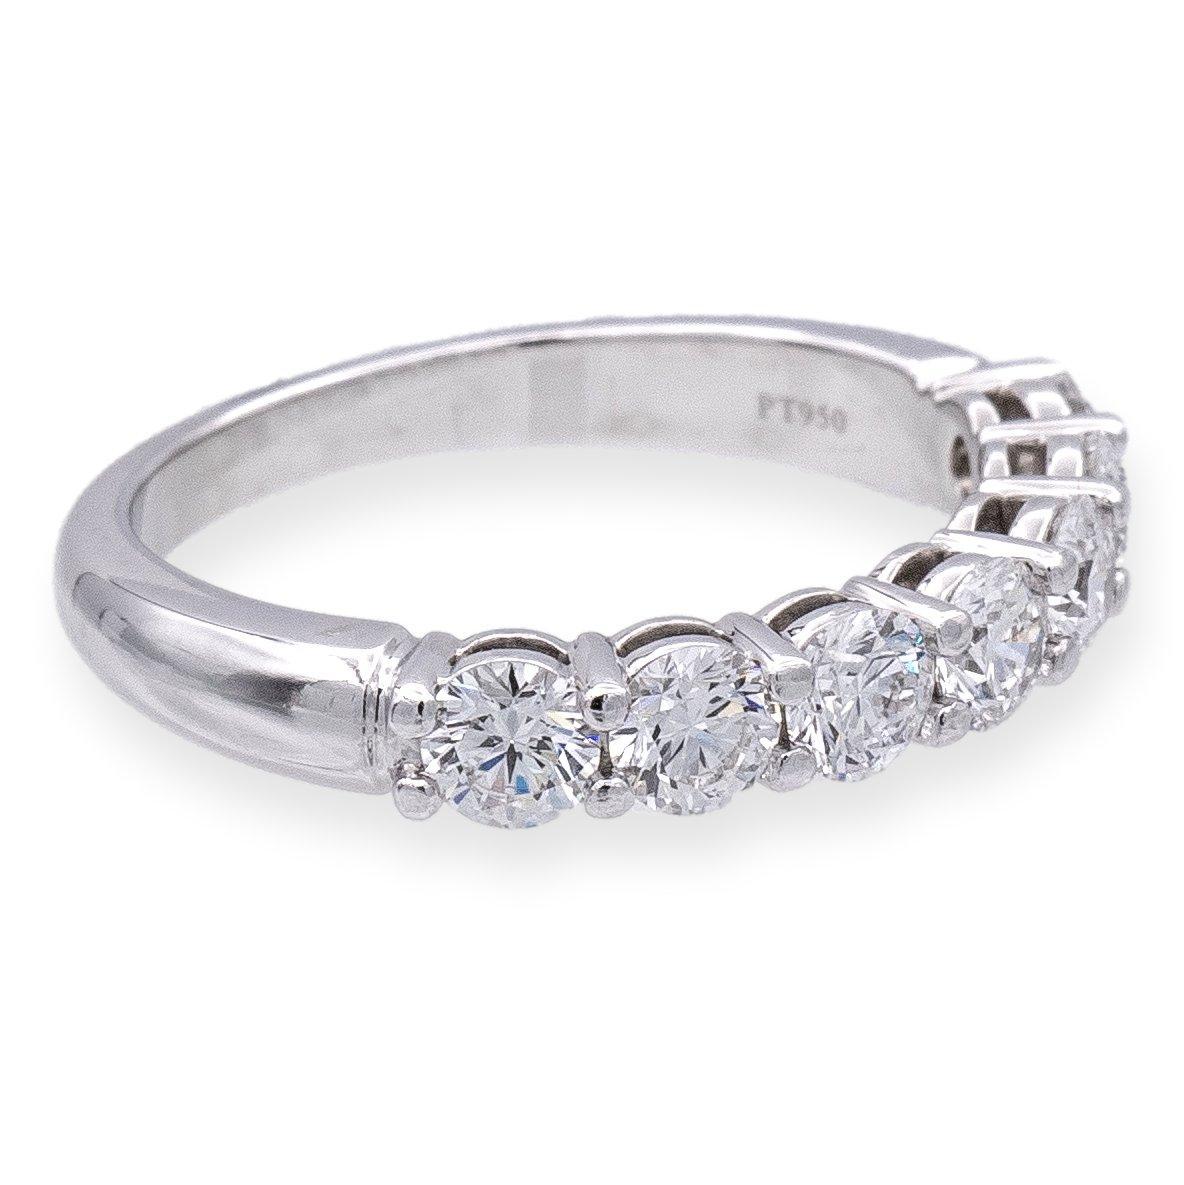 Tiffany & Co. Forever Half Band Ring, Meticulously crafted in platinum, this exquisite piece boasts seven Round Brilliant cut diamonds, collectively weighing 0.91 carats. Dazzling in E-F color and VVS2-VS clarity, each diamond is set in shared